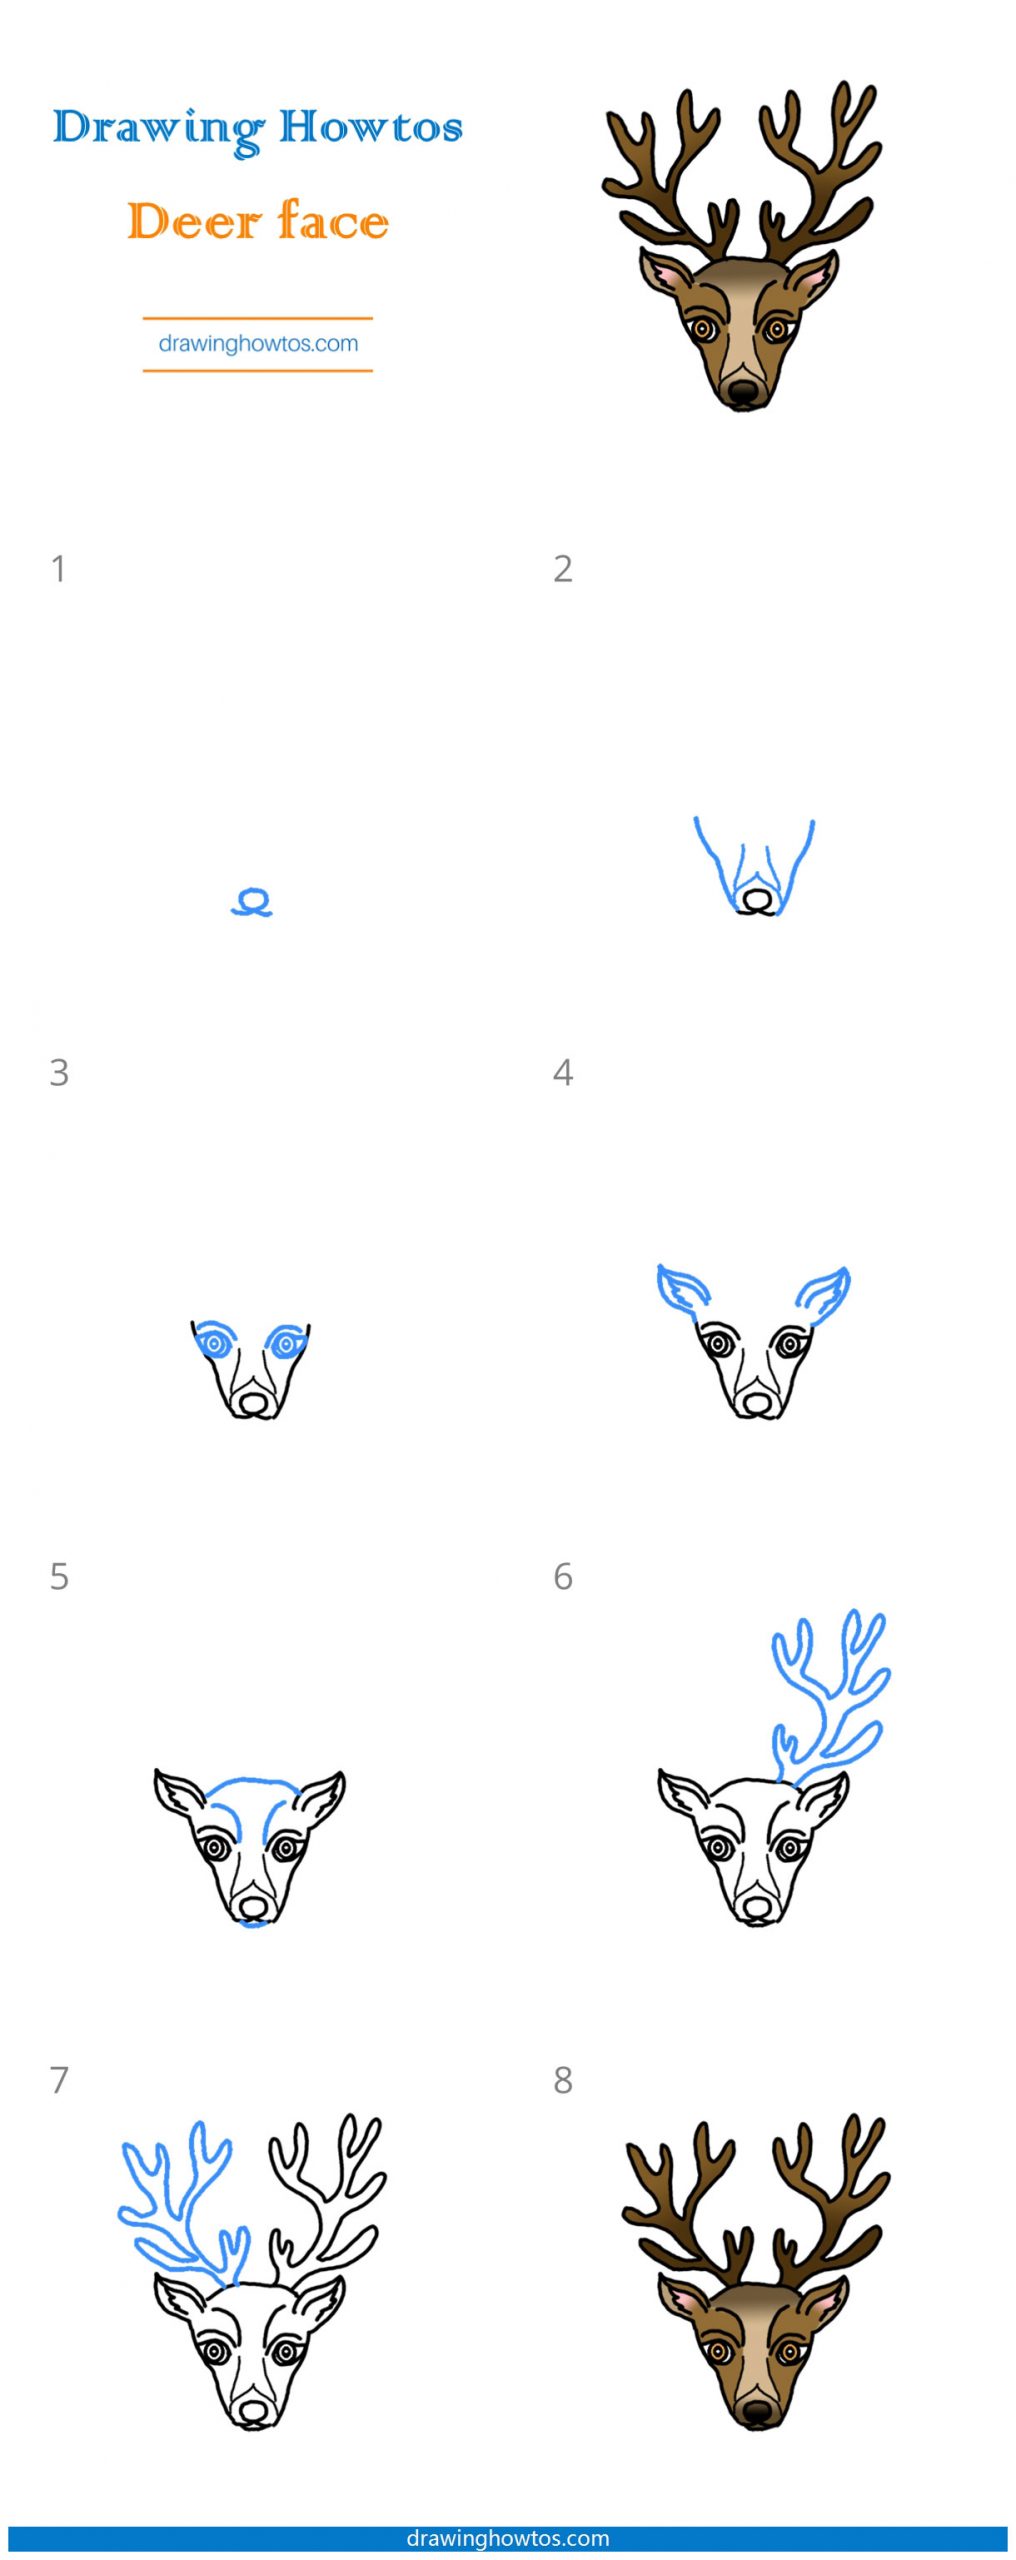 How to Draw a Deer Face Step by Step